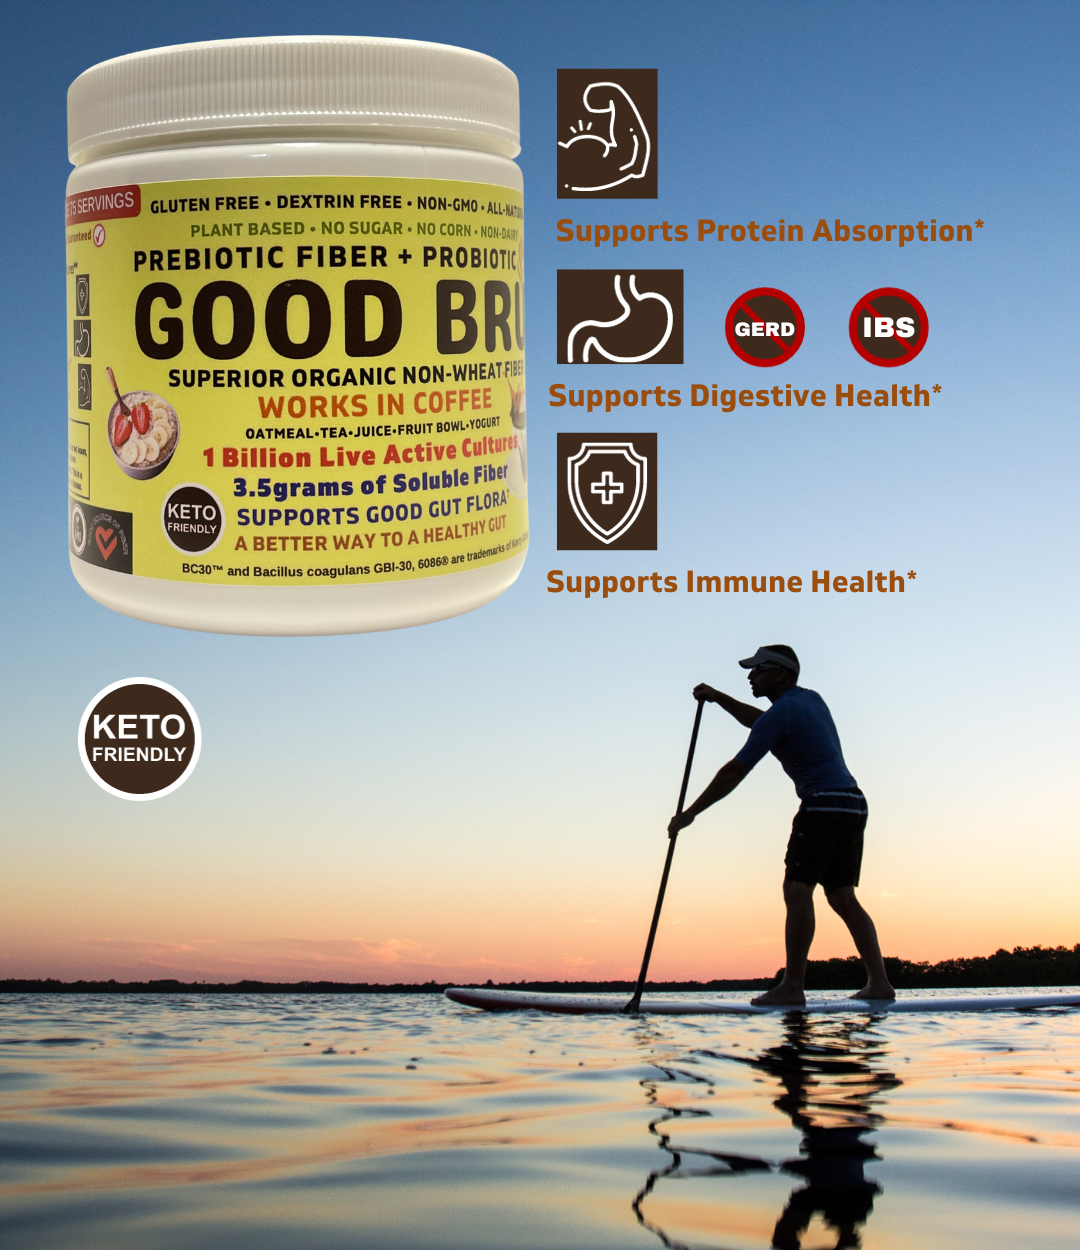 Good Bru organic prebiotic plus probiotic single pack. A healthy gut is important to overall health. Keto friendly all natural soluble fiber that goes great in coffee. 1 Billlion live active cultures that supports digestive health, immune function, protein utilization and fight IBS, GERD.